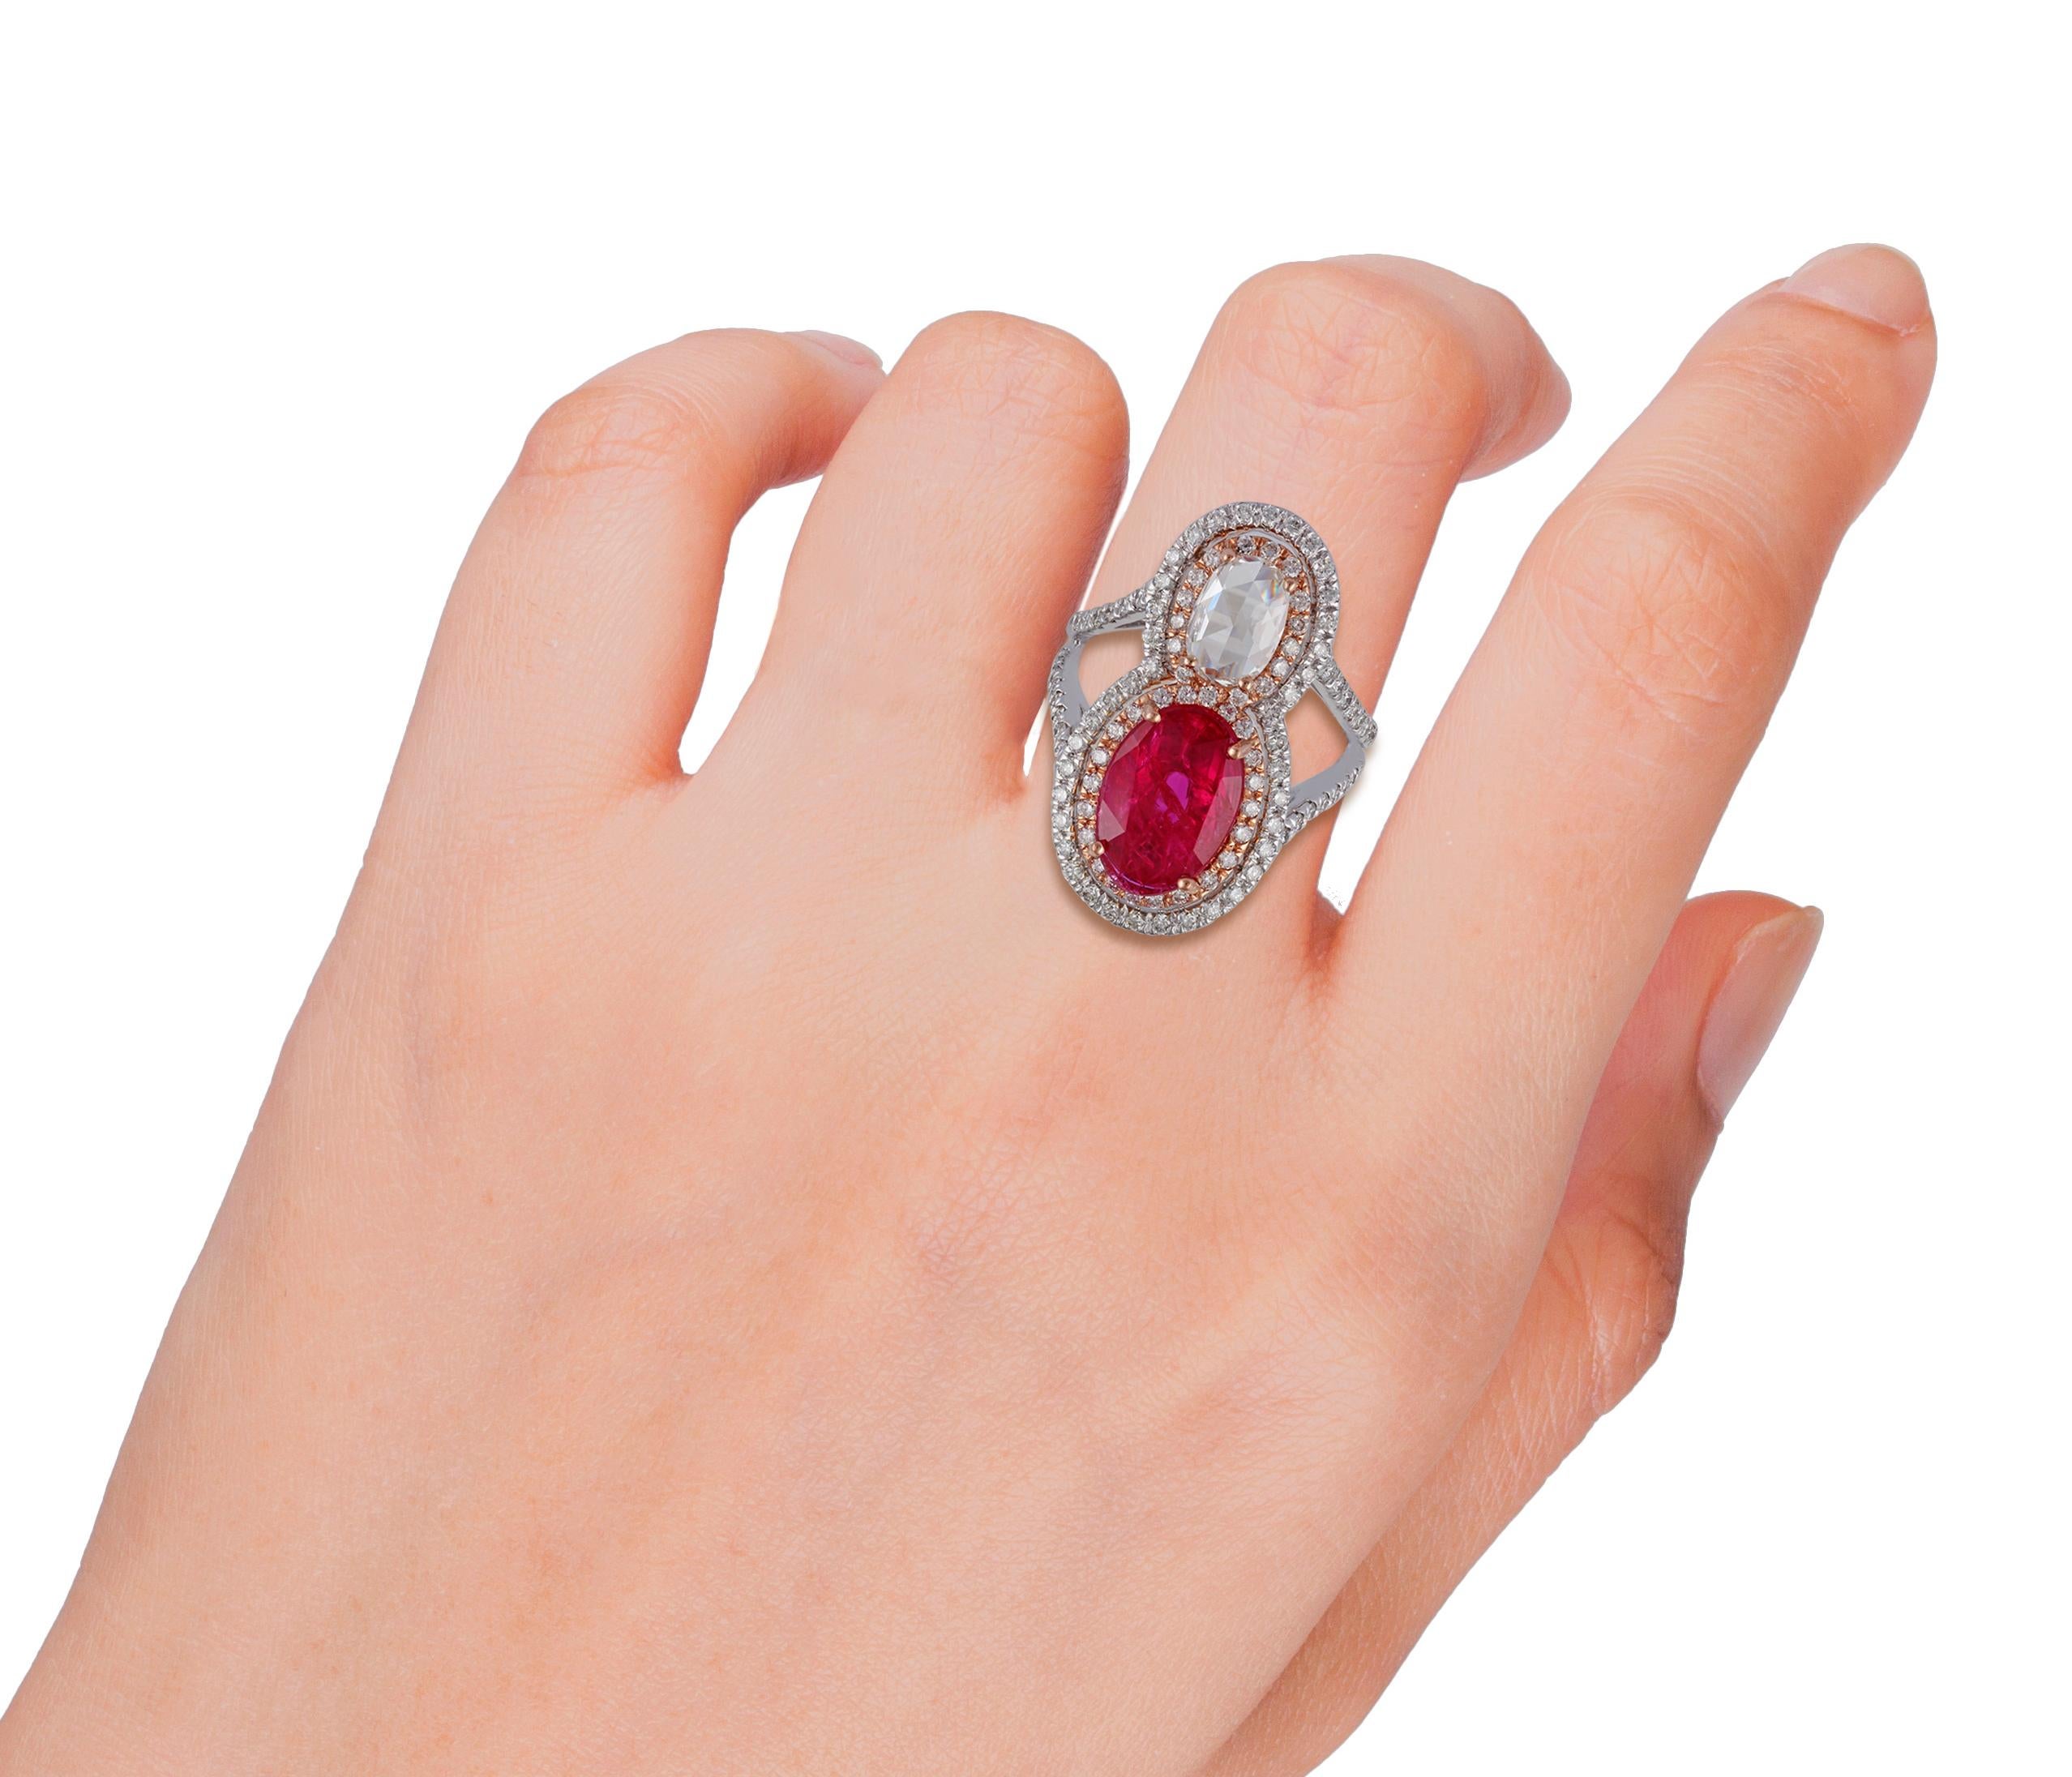 Rose Cut 2.09 Carat Ruby and Diamond Ring Studded in 18 Karat White Gold For Sale